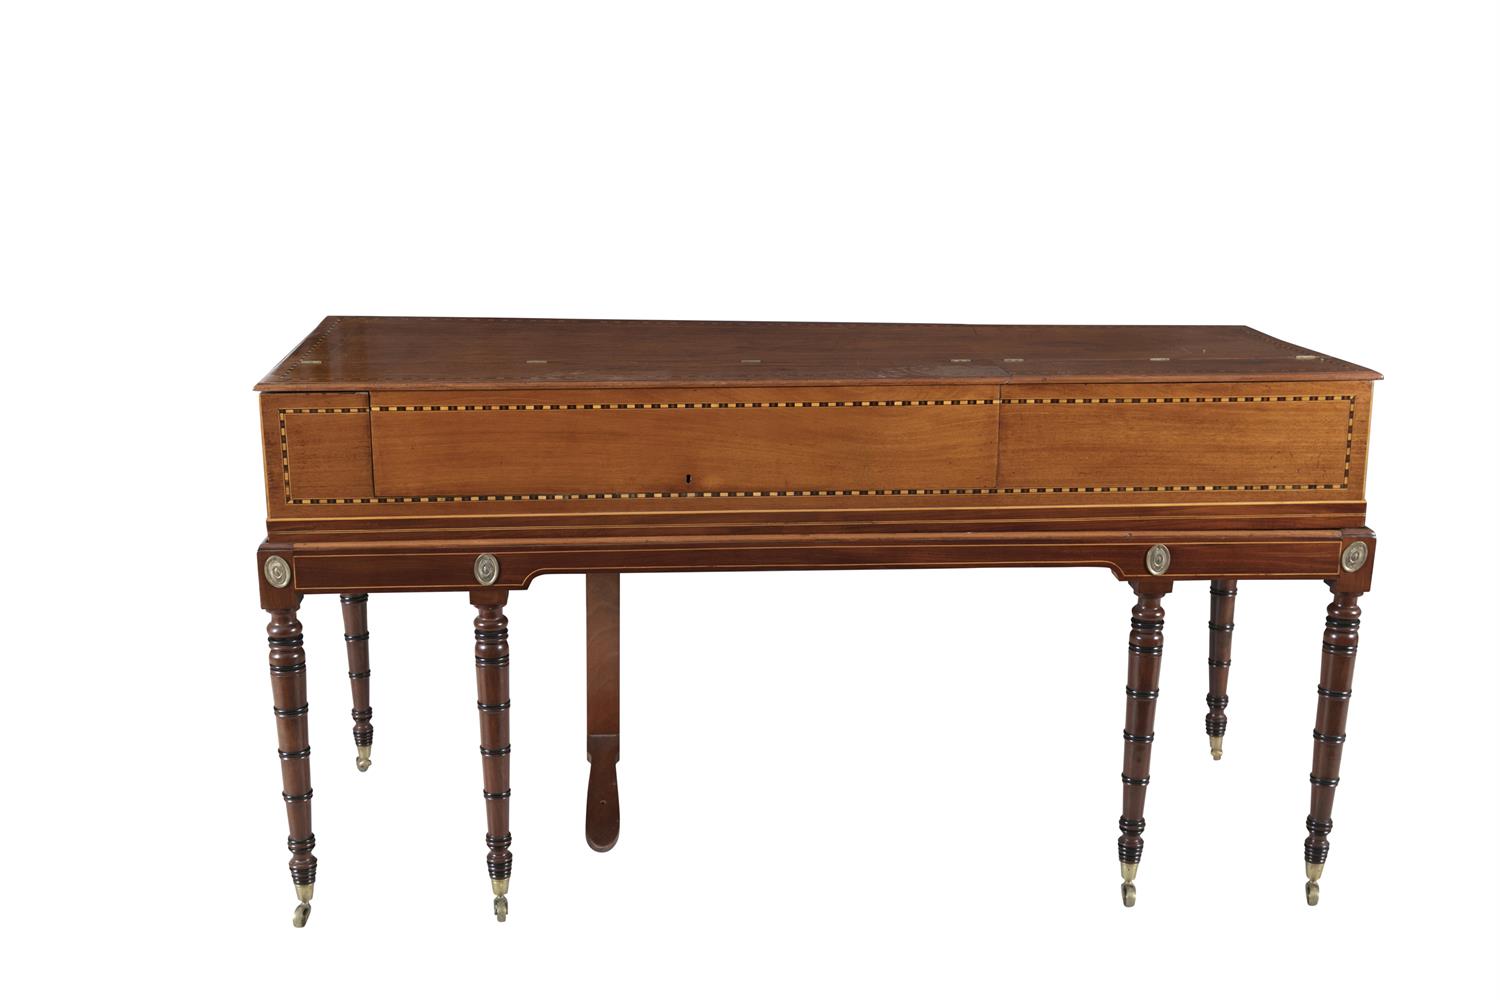 AN IRISH GEORGE III INLAID MAHOGANY AND SATINWOOD SQUARE PIANO, the case decorated with checkered - Image 2 of 2